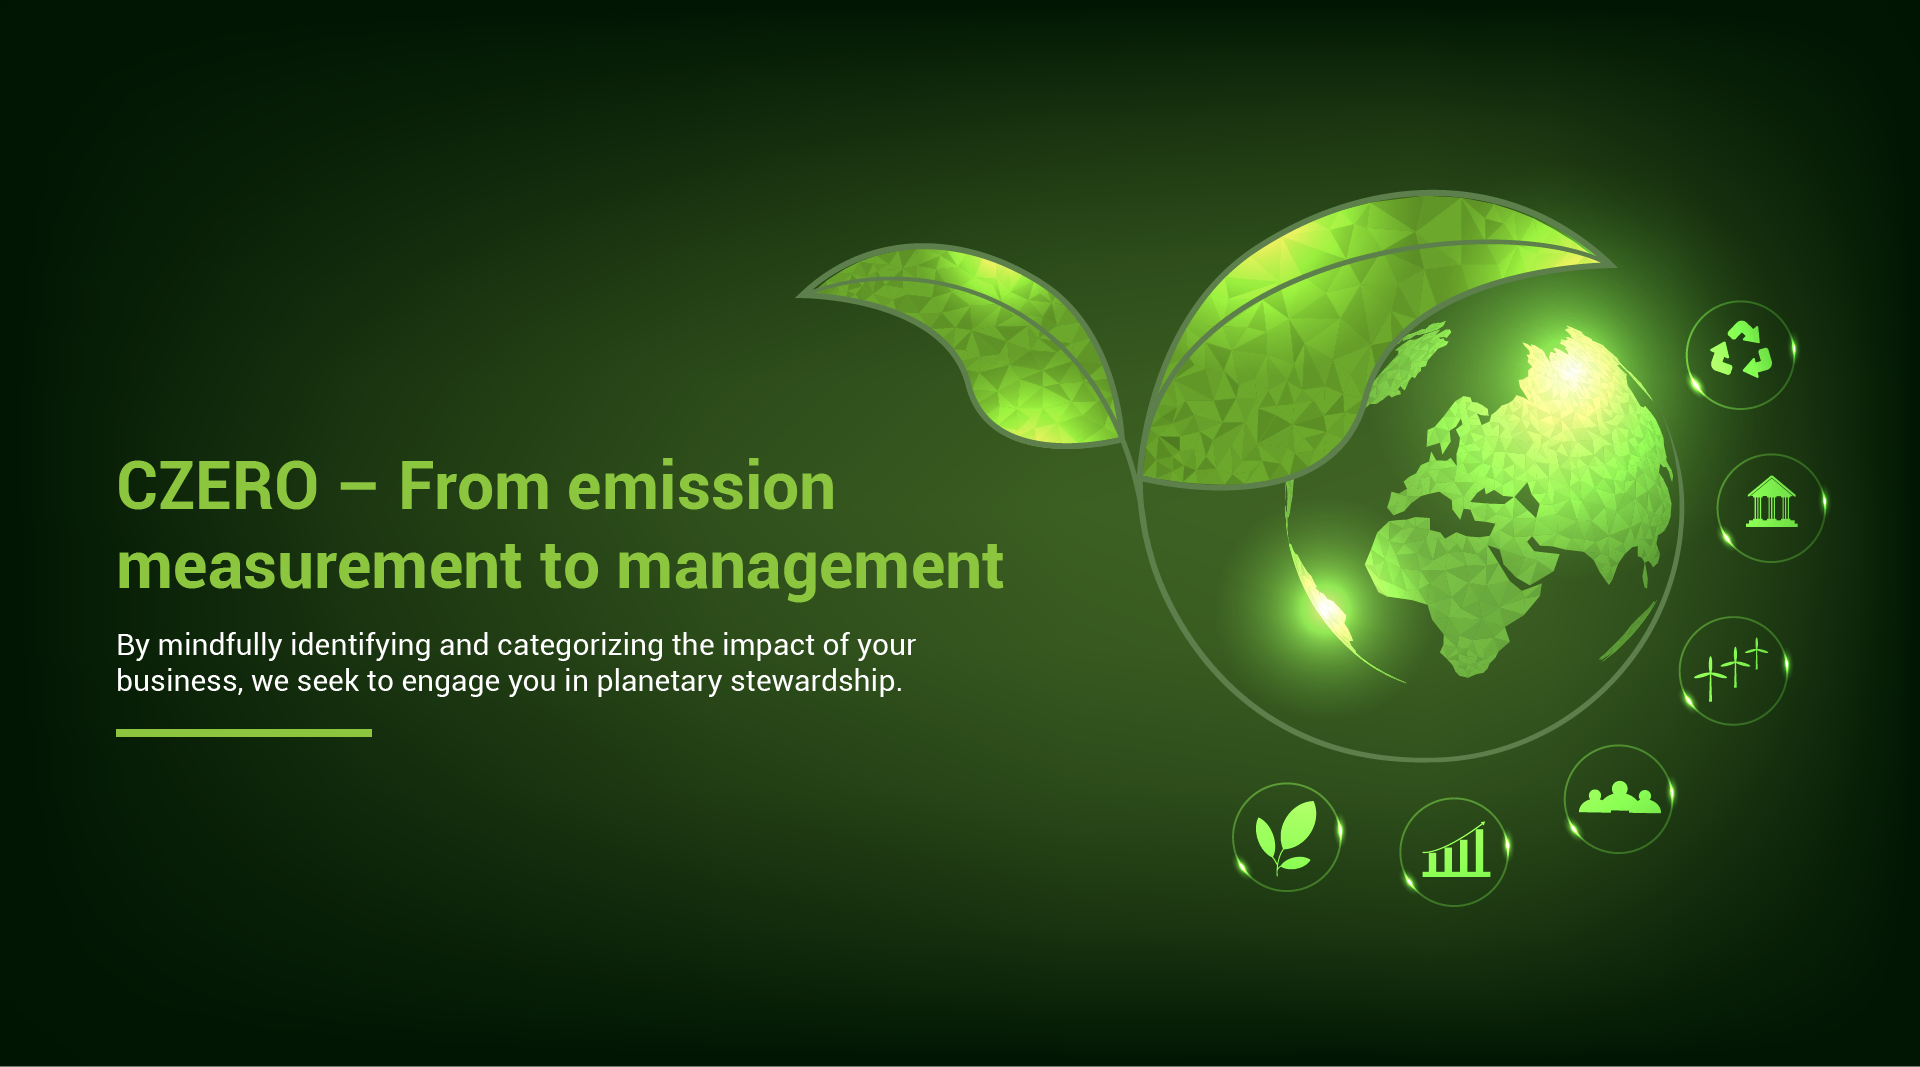 CZERO – From emission measurement to management